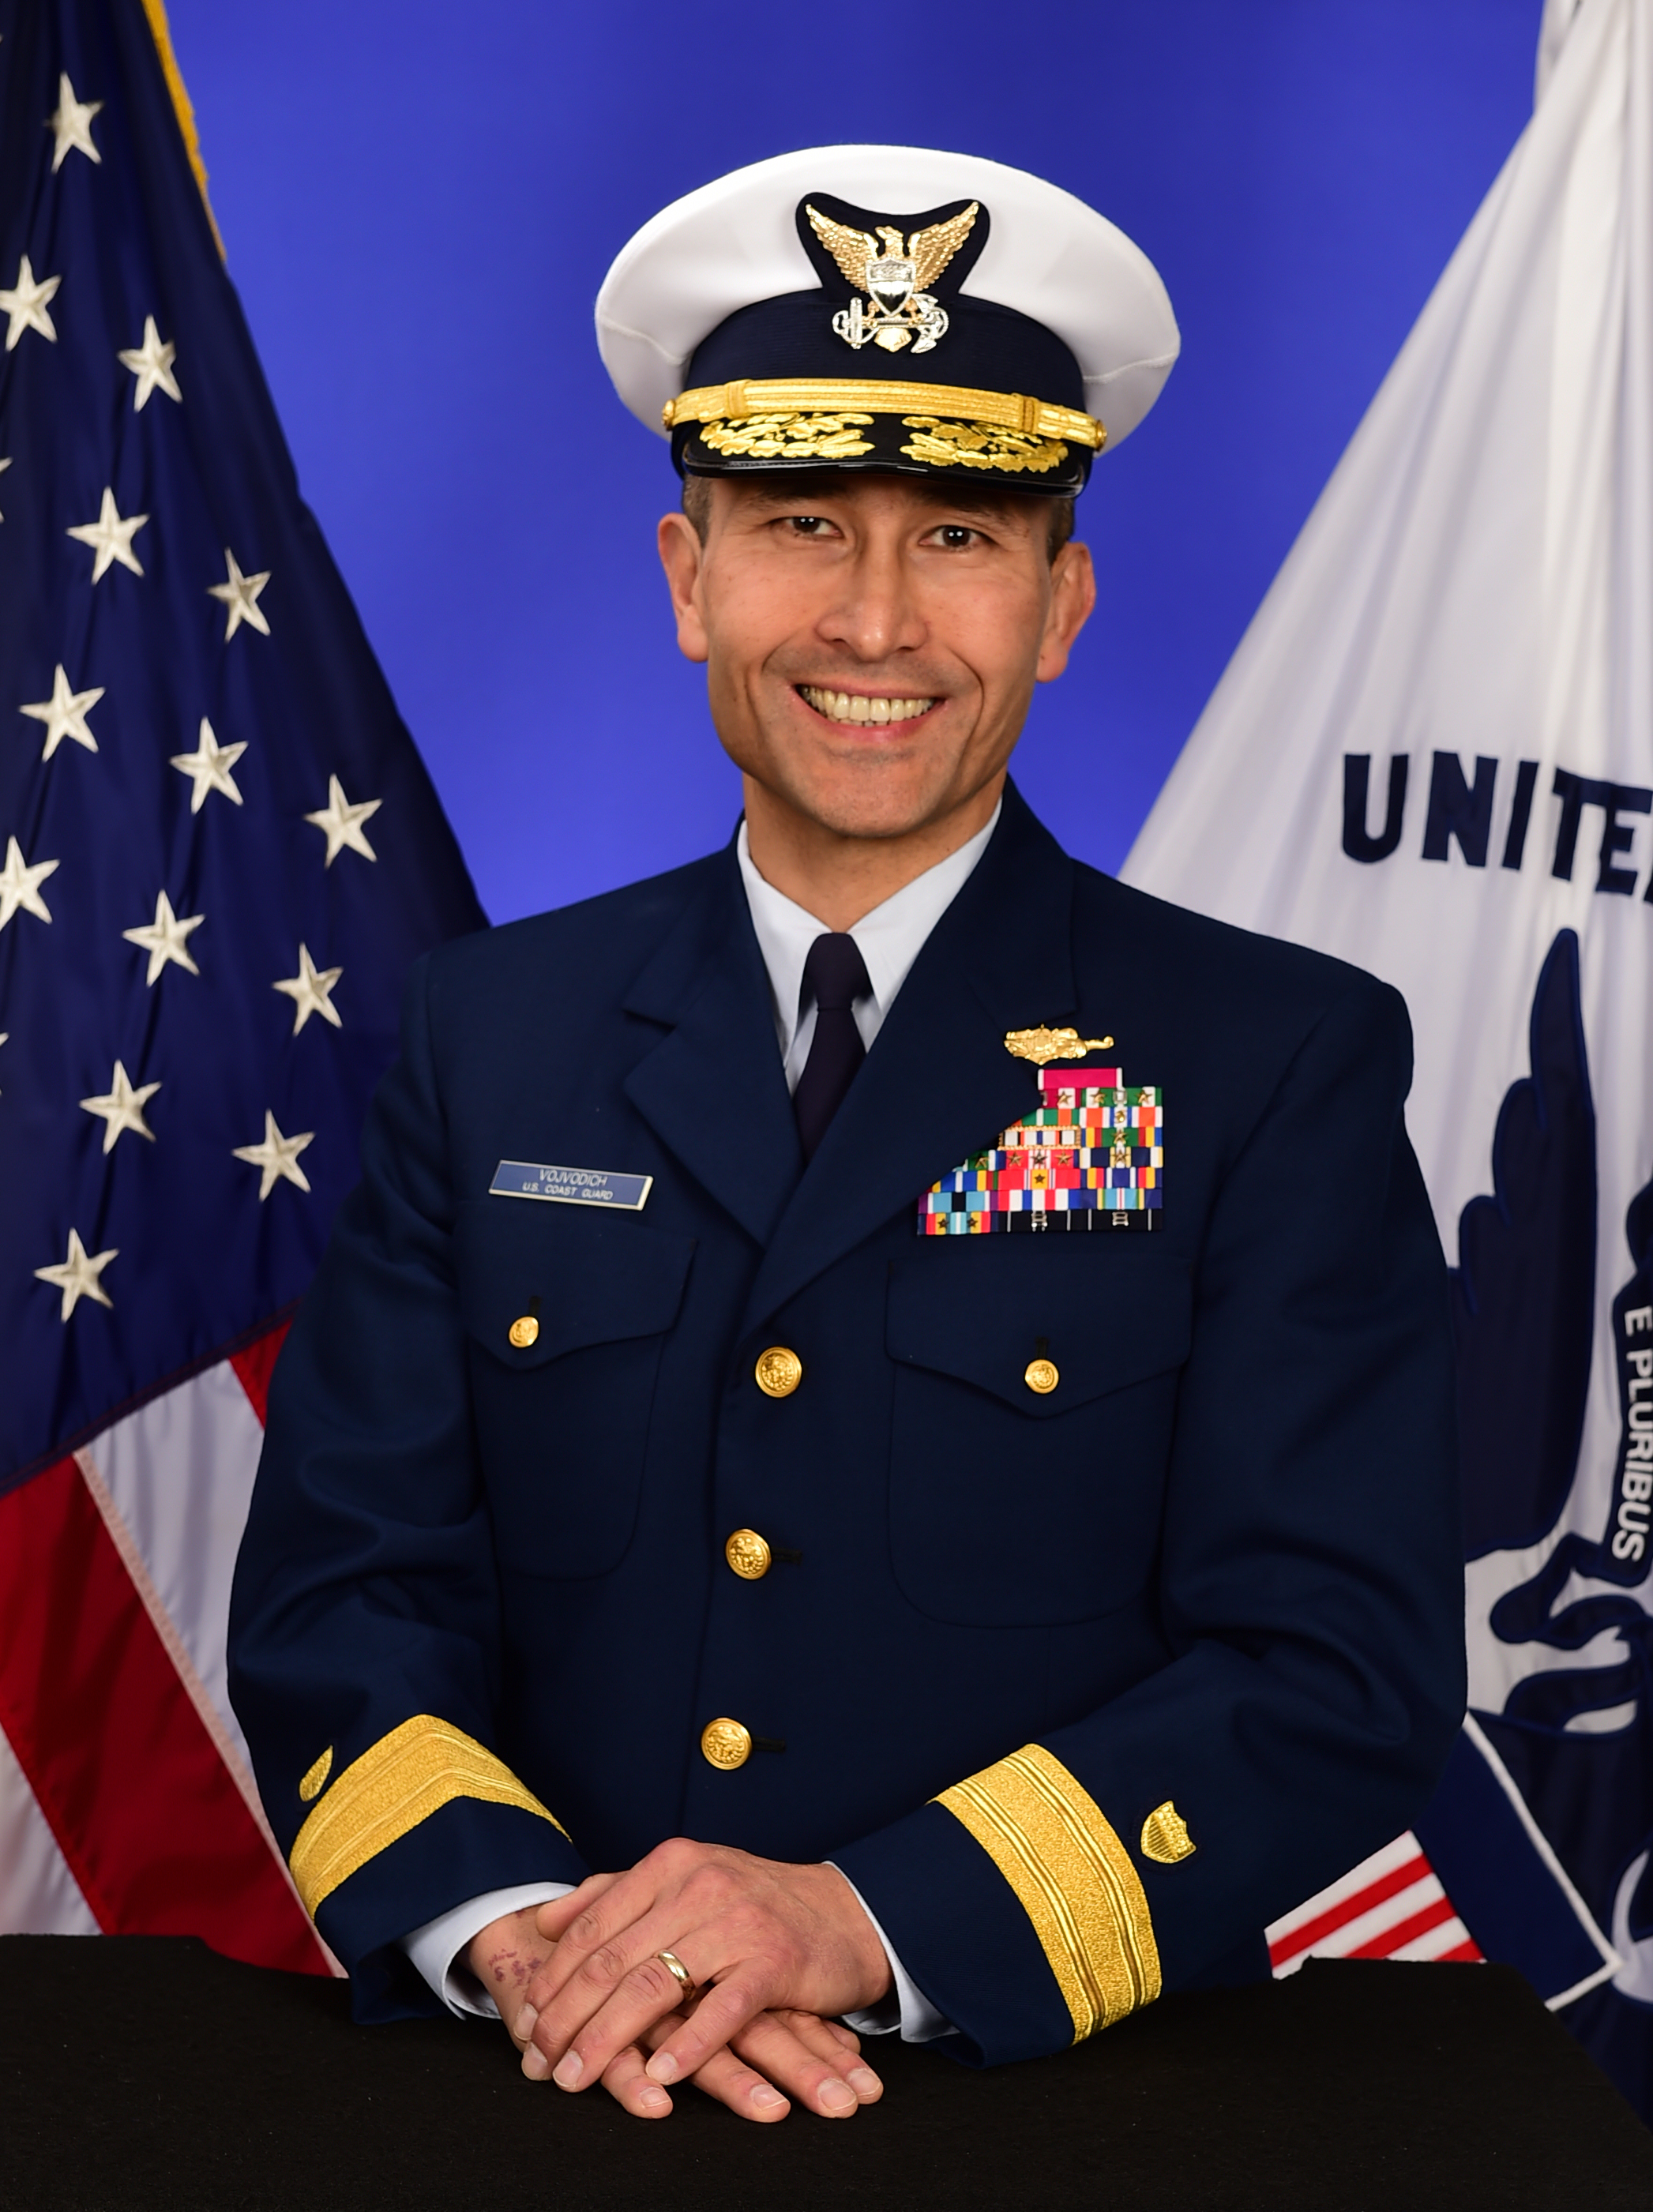 15.	Photograph of Rear Admiral Joseph Vojvodich, Coast Guard Academy class of 1985, who became the first Asian American flag officer in the Coast Guard in 2013. (U.S. Coast Guard)